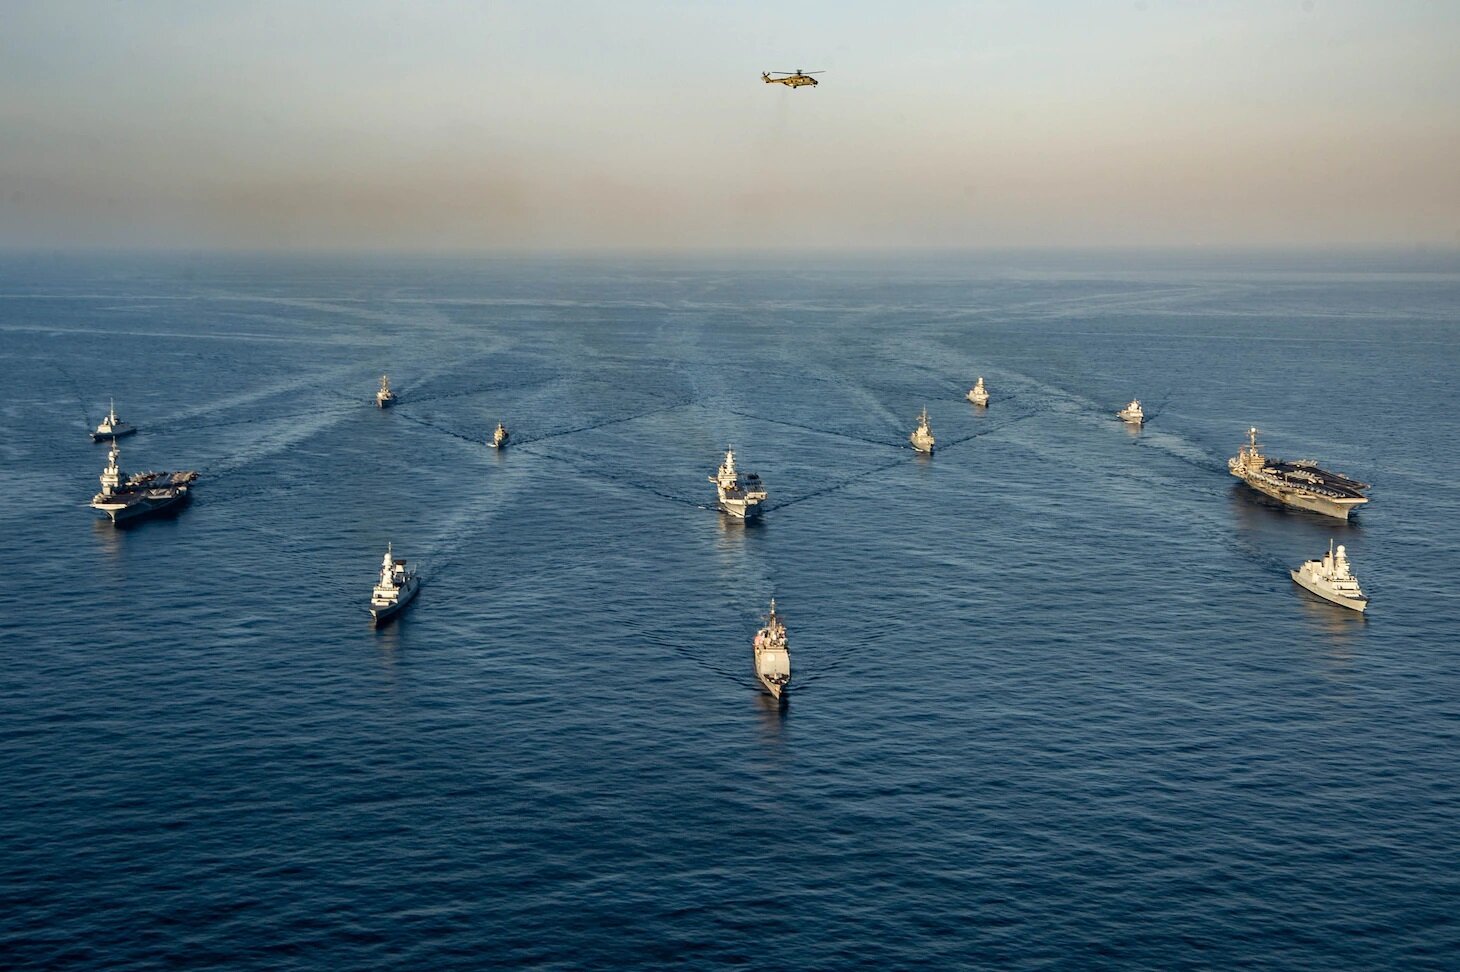 Three Carriers and Three Cruisers: Battle for the Eastern Med. February 2022.